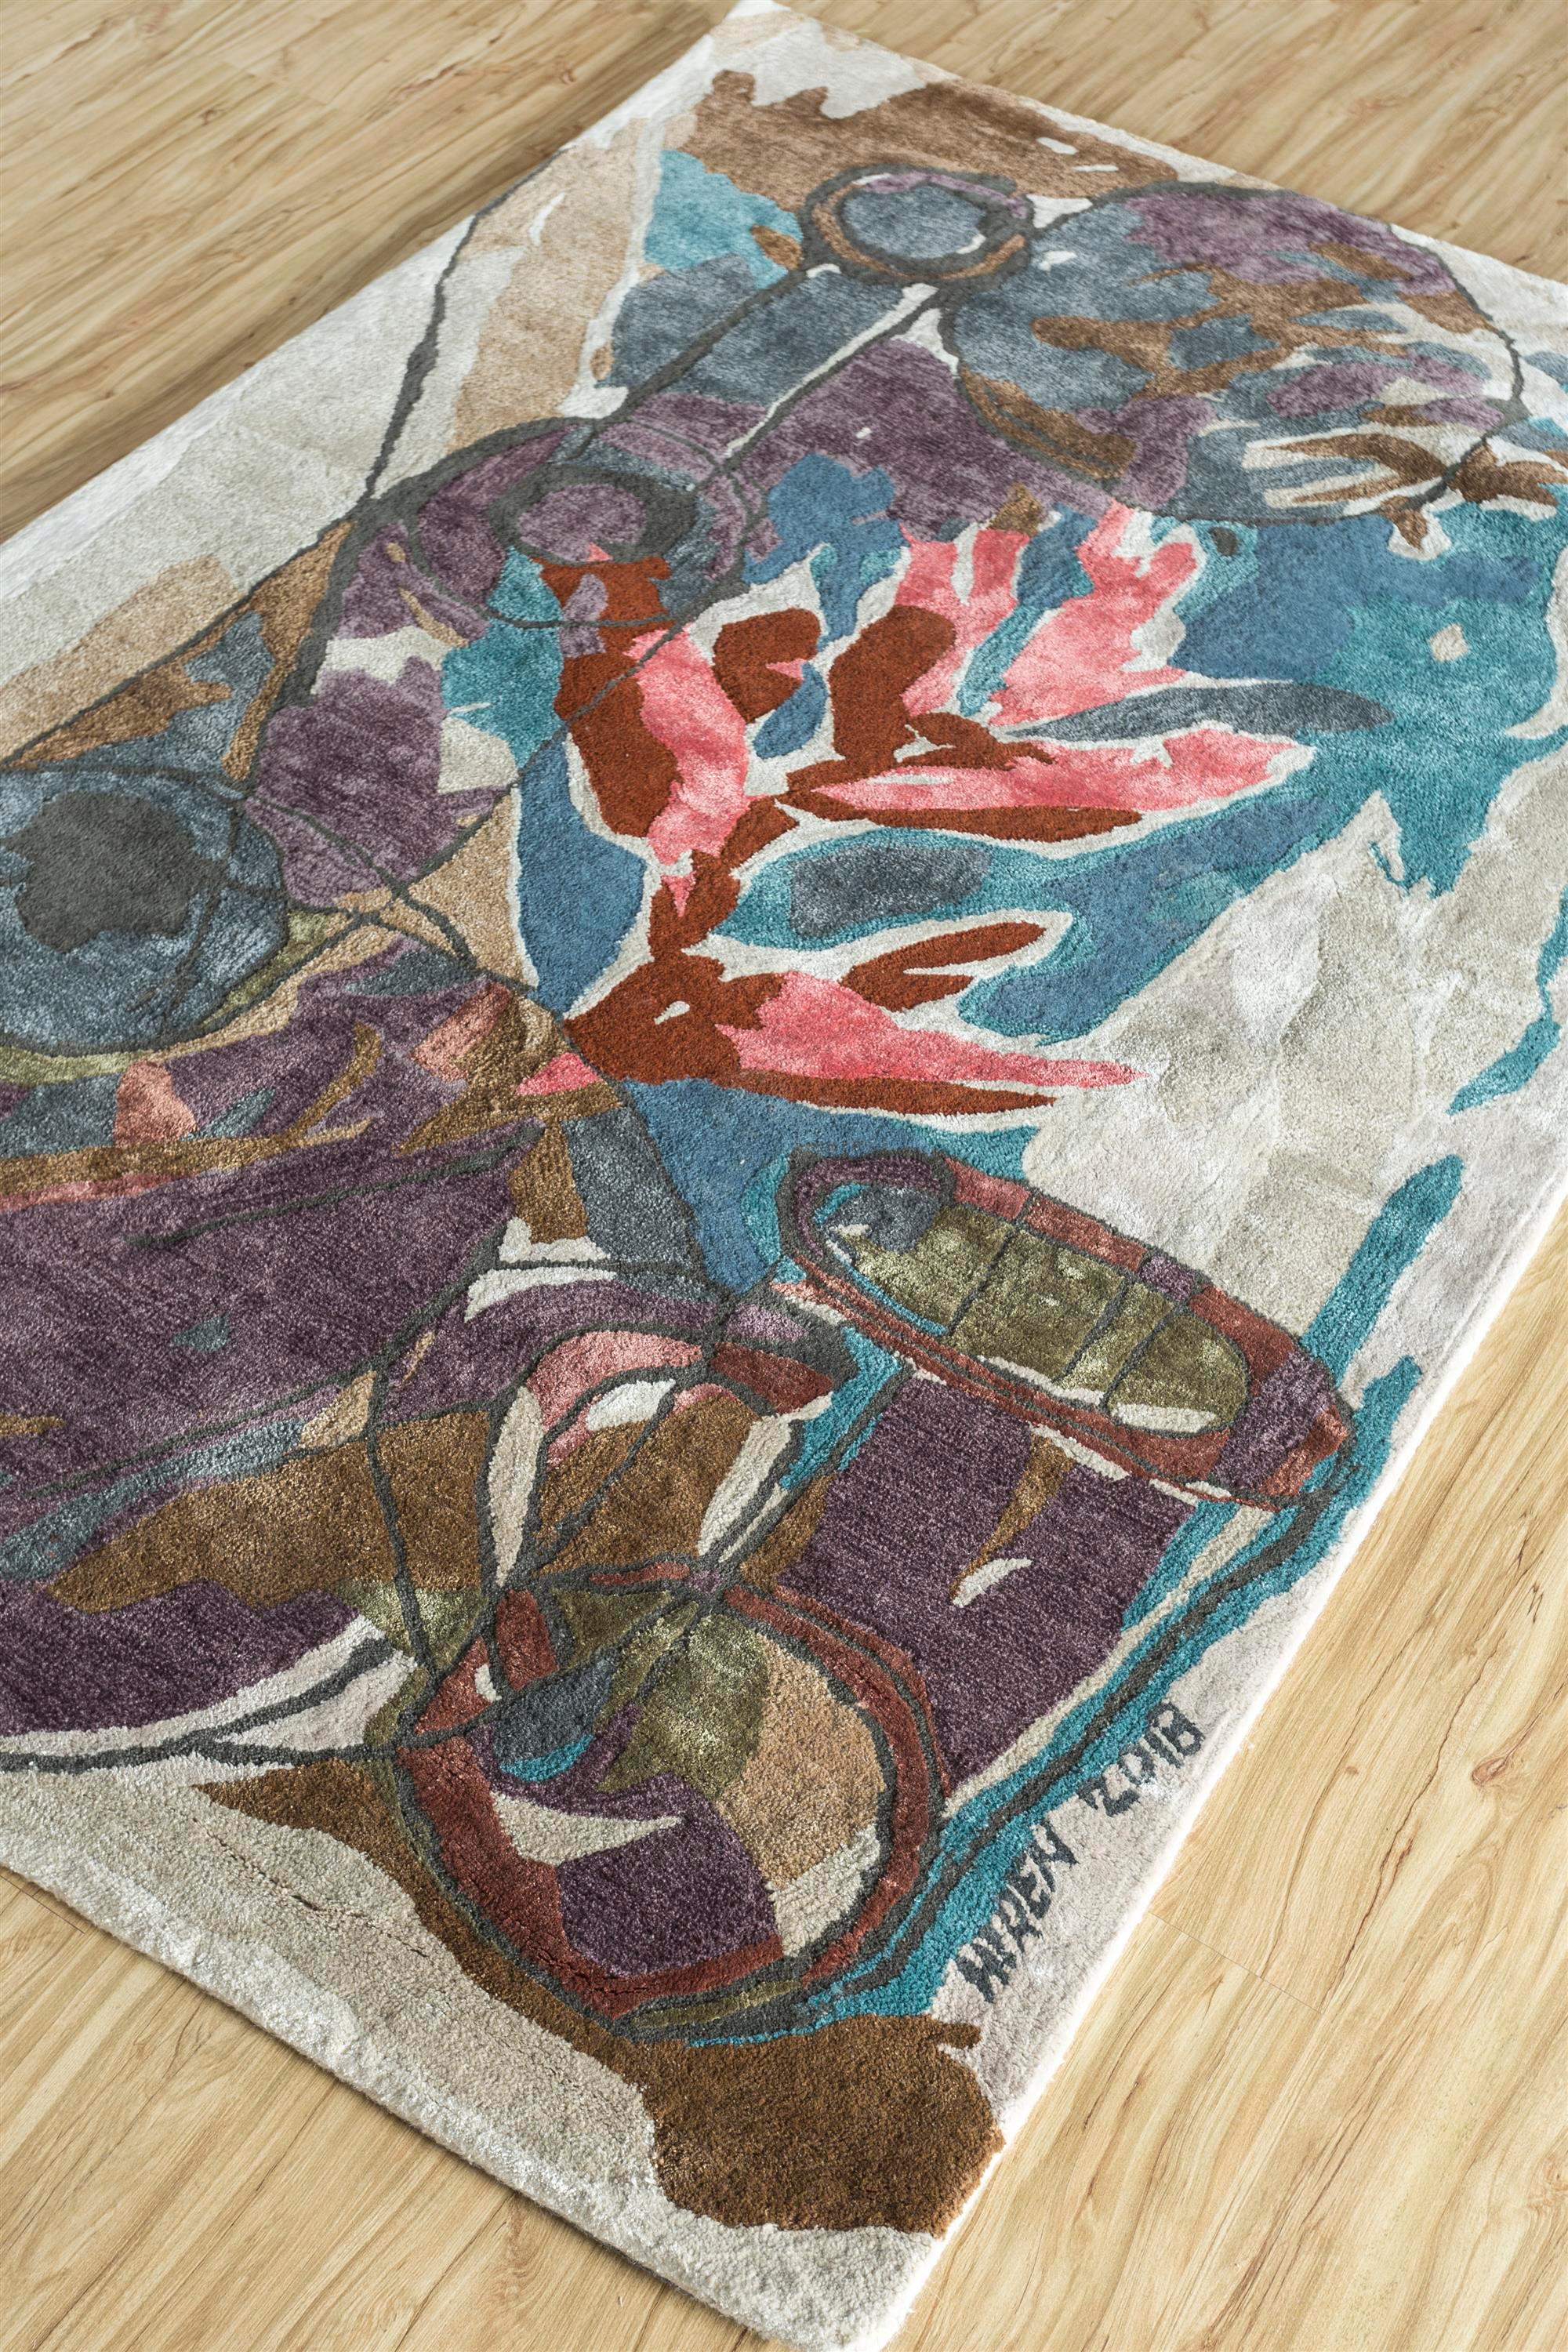 Ever dreamt of escaping the urban humdrum and immersing yourself in the serenity of the countryside? This graphic rug, an ode to various countryside travels, brings a piece of that idyllic dream right into your home. Imagine waking up to the gentle